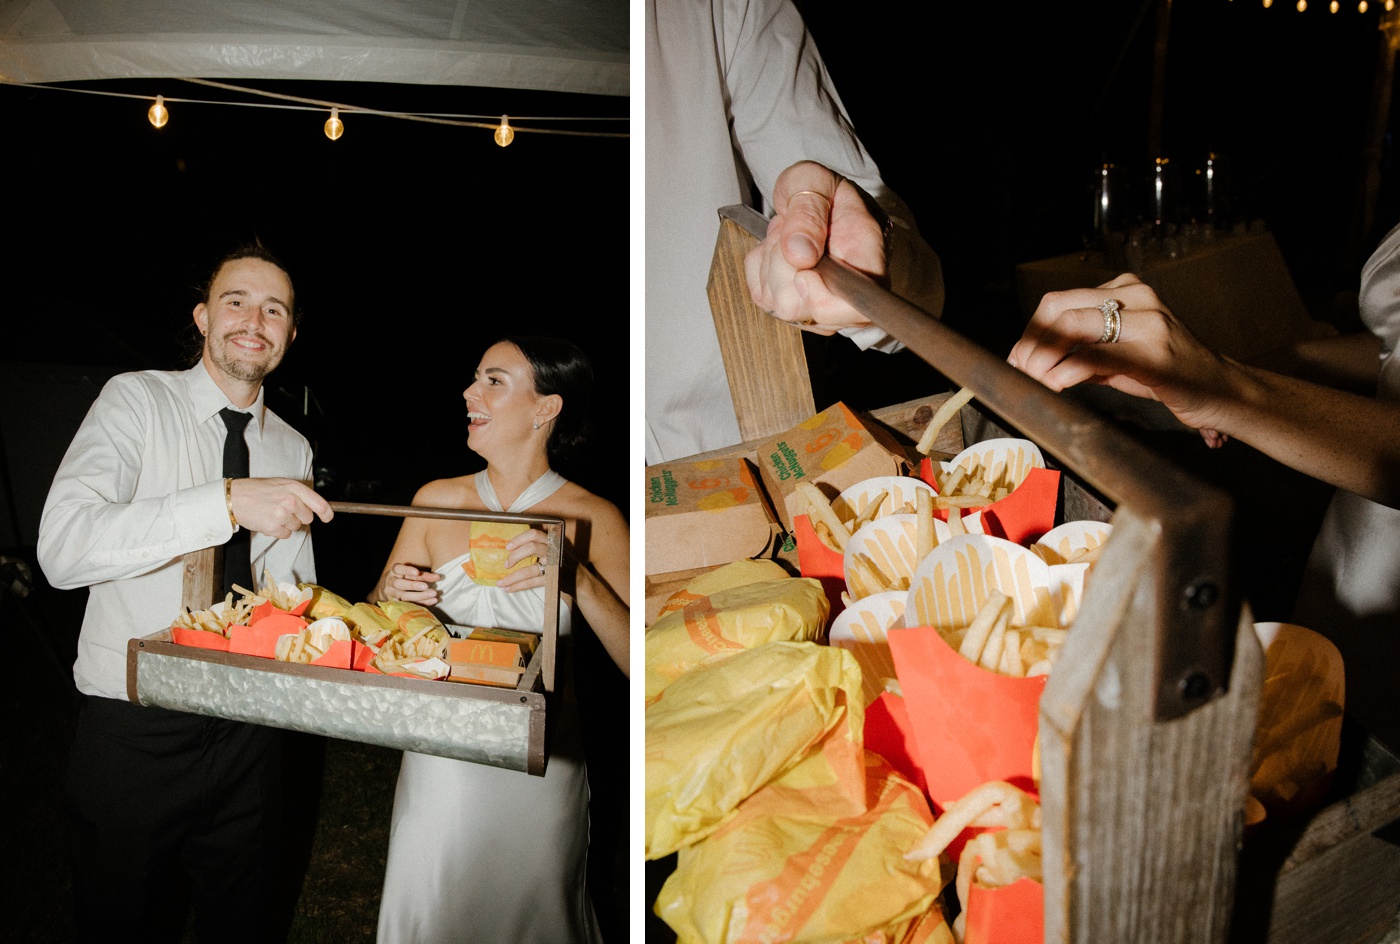 Bride and groom eating McDonald's for a late-night snack at their wedding reception